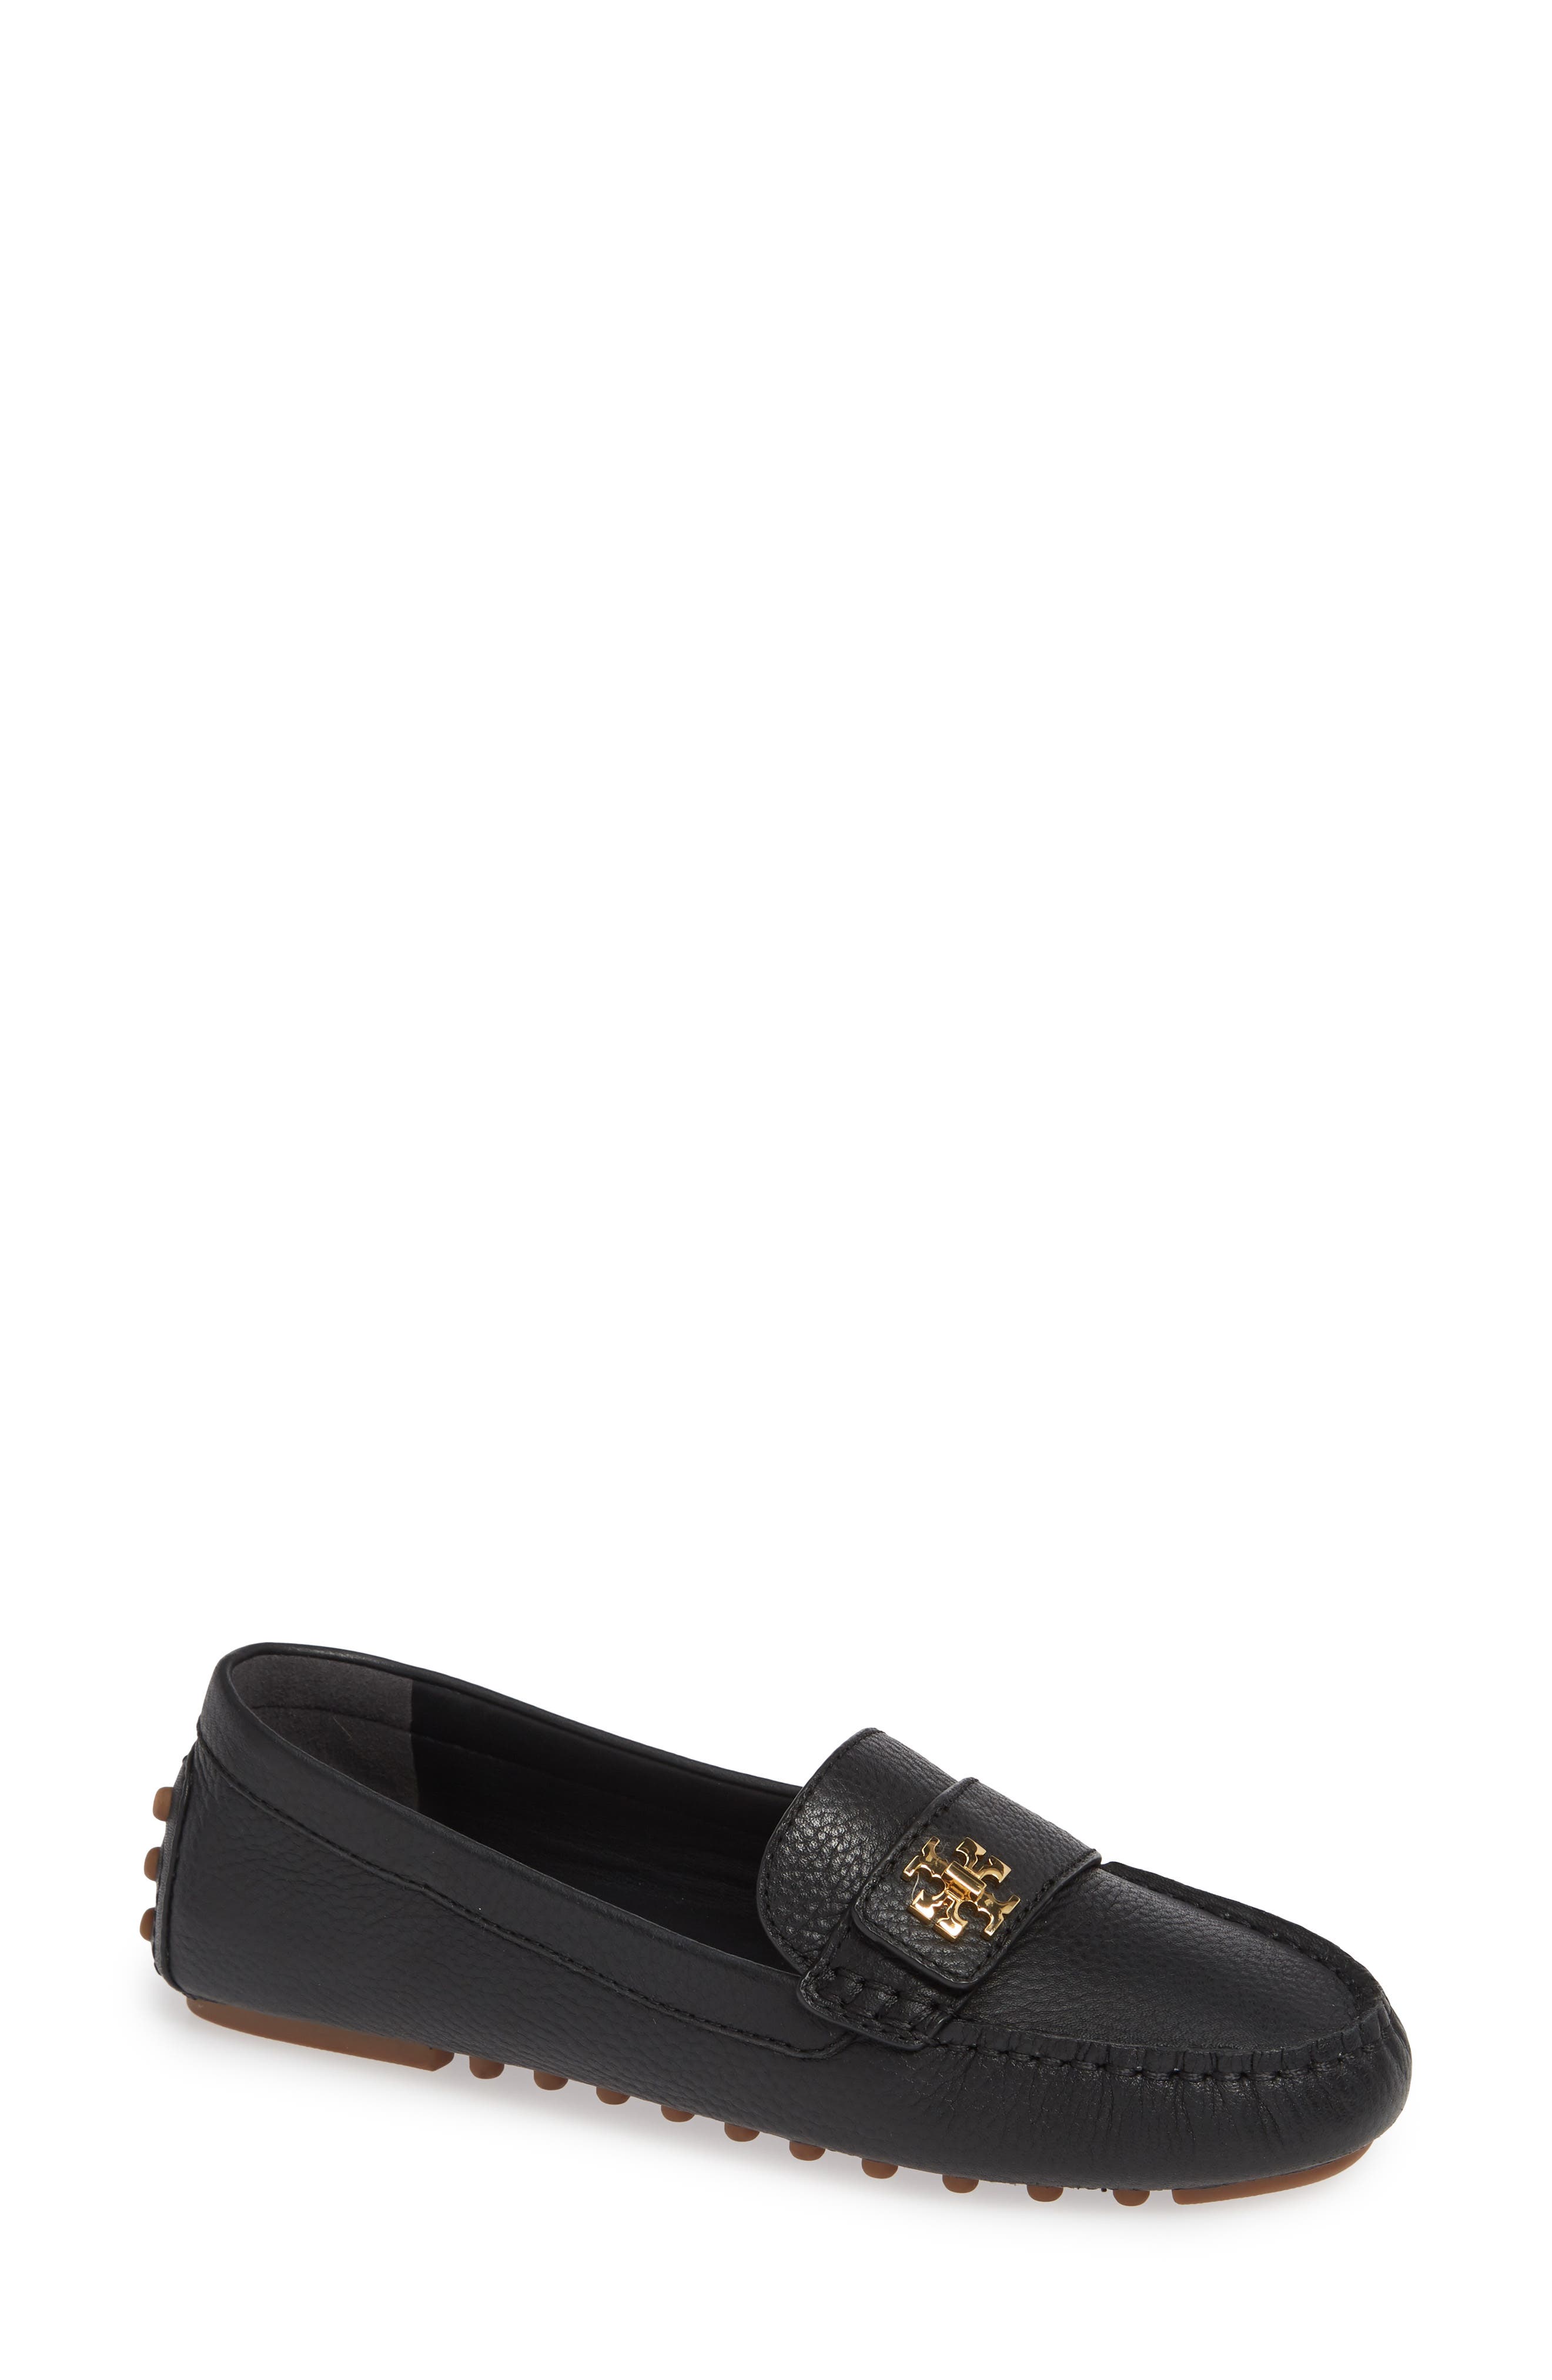 tory burch loafers black